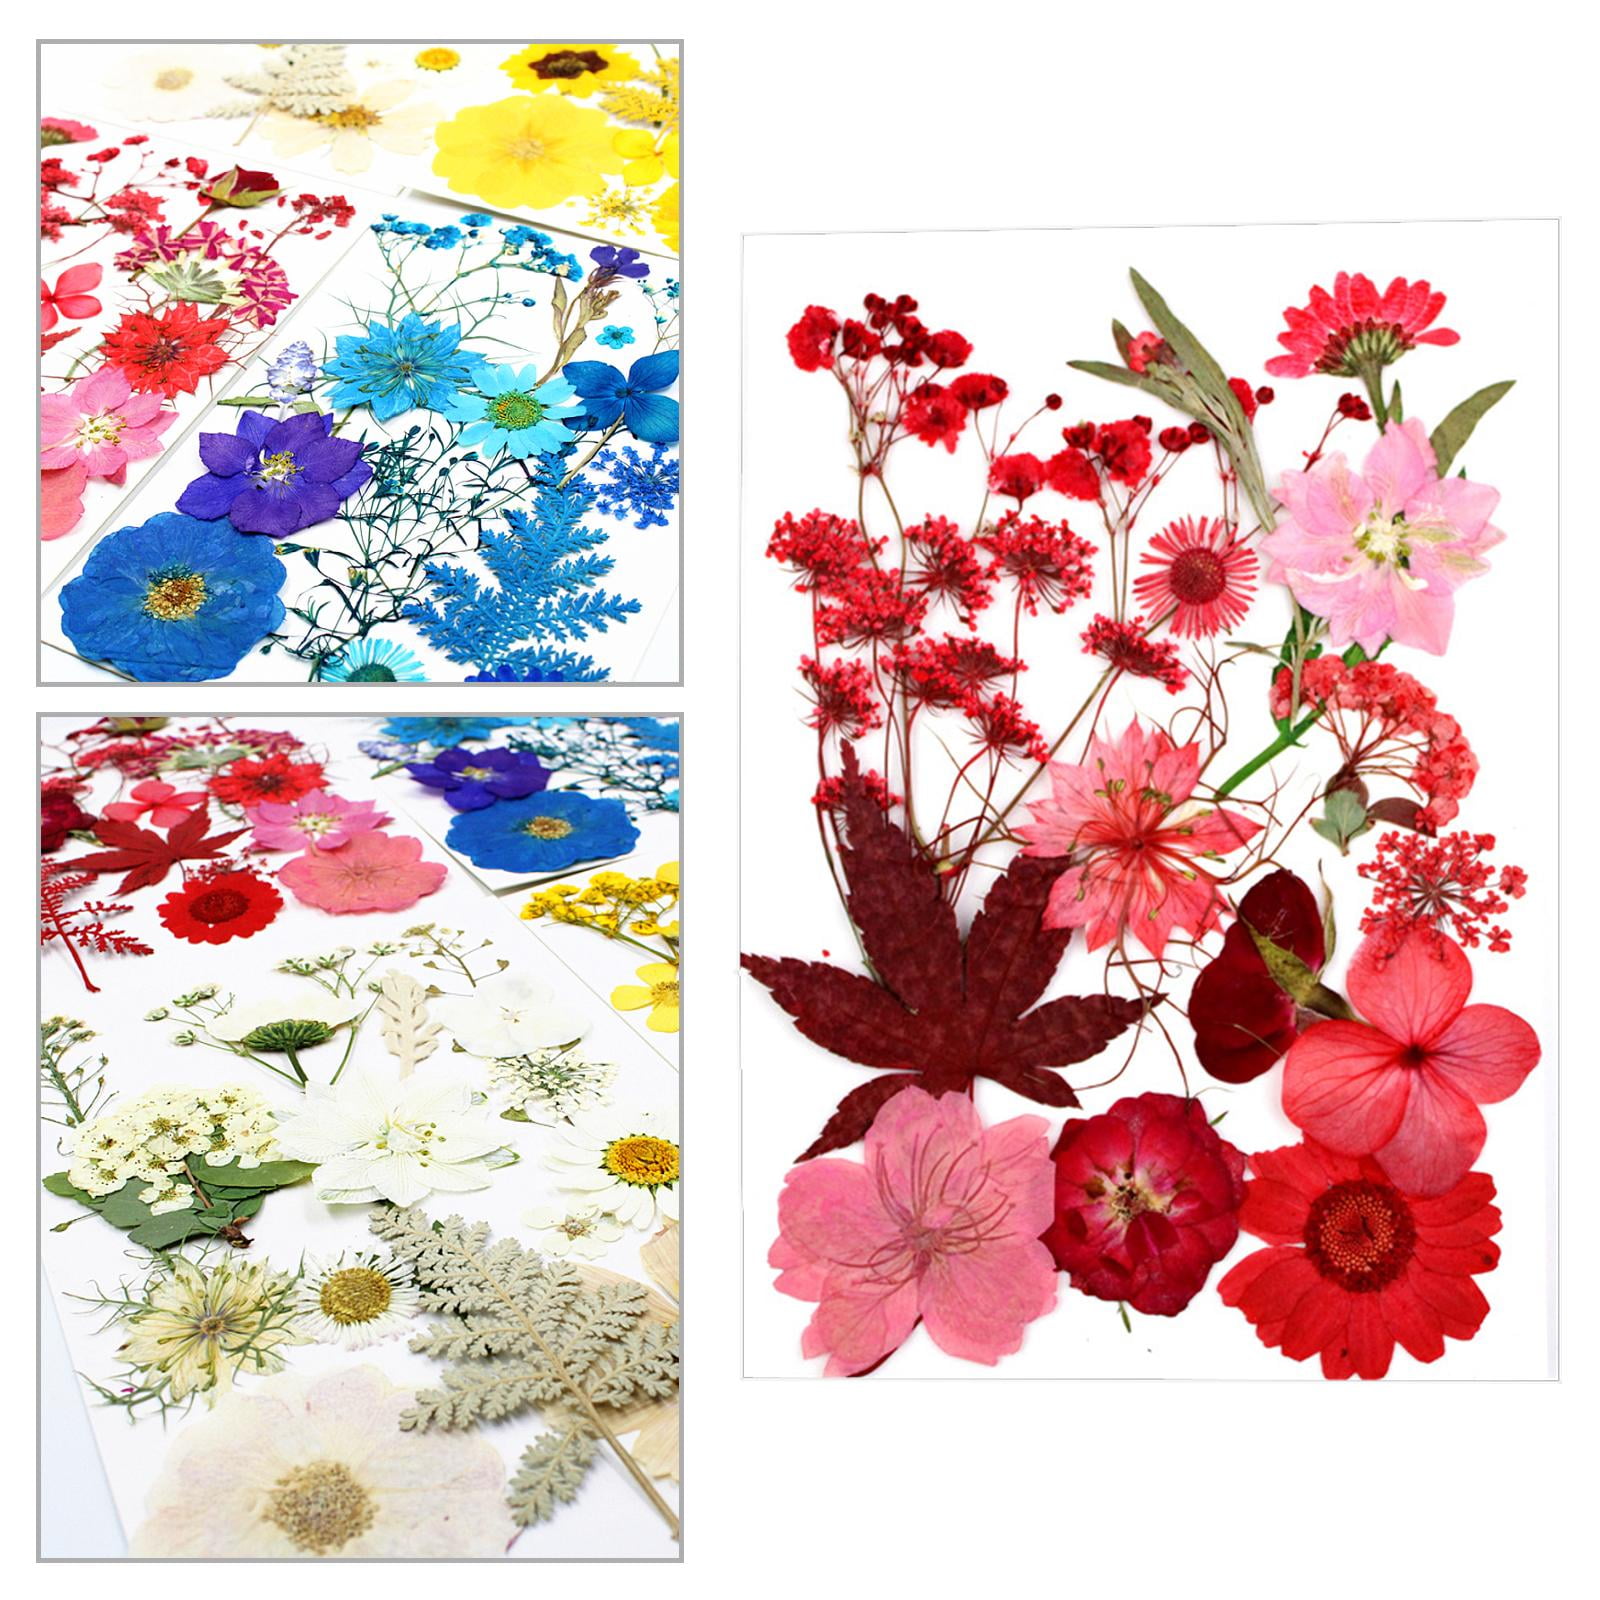  EXCEART 4 Sets Dried Flower Immortality Dry Flowers Pressed  Flower Leafs Scrapbooking Dried Flowers Sticker Candle Dried Flower Flowers  for Resin Molds Pressed Flowers Baby Charm Warm up